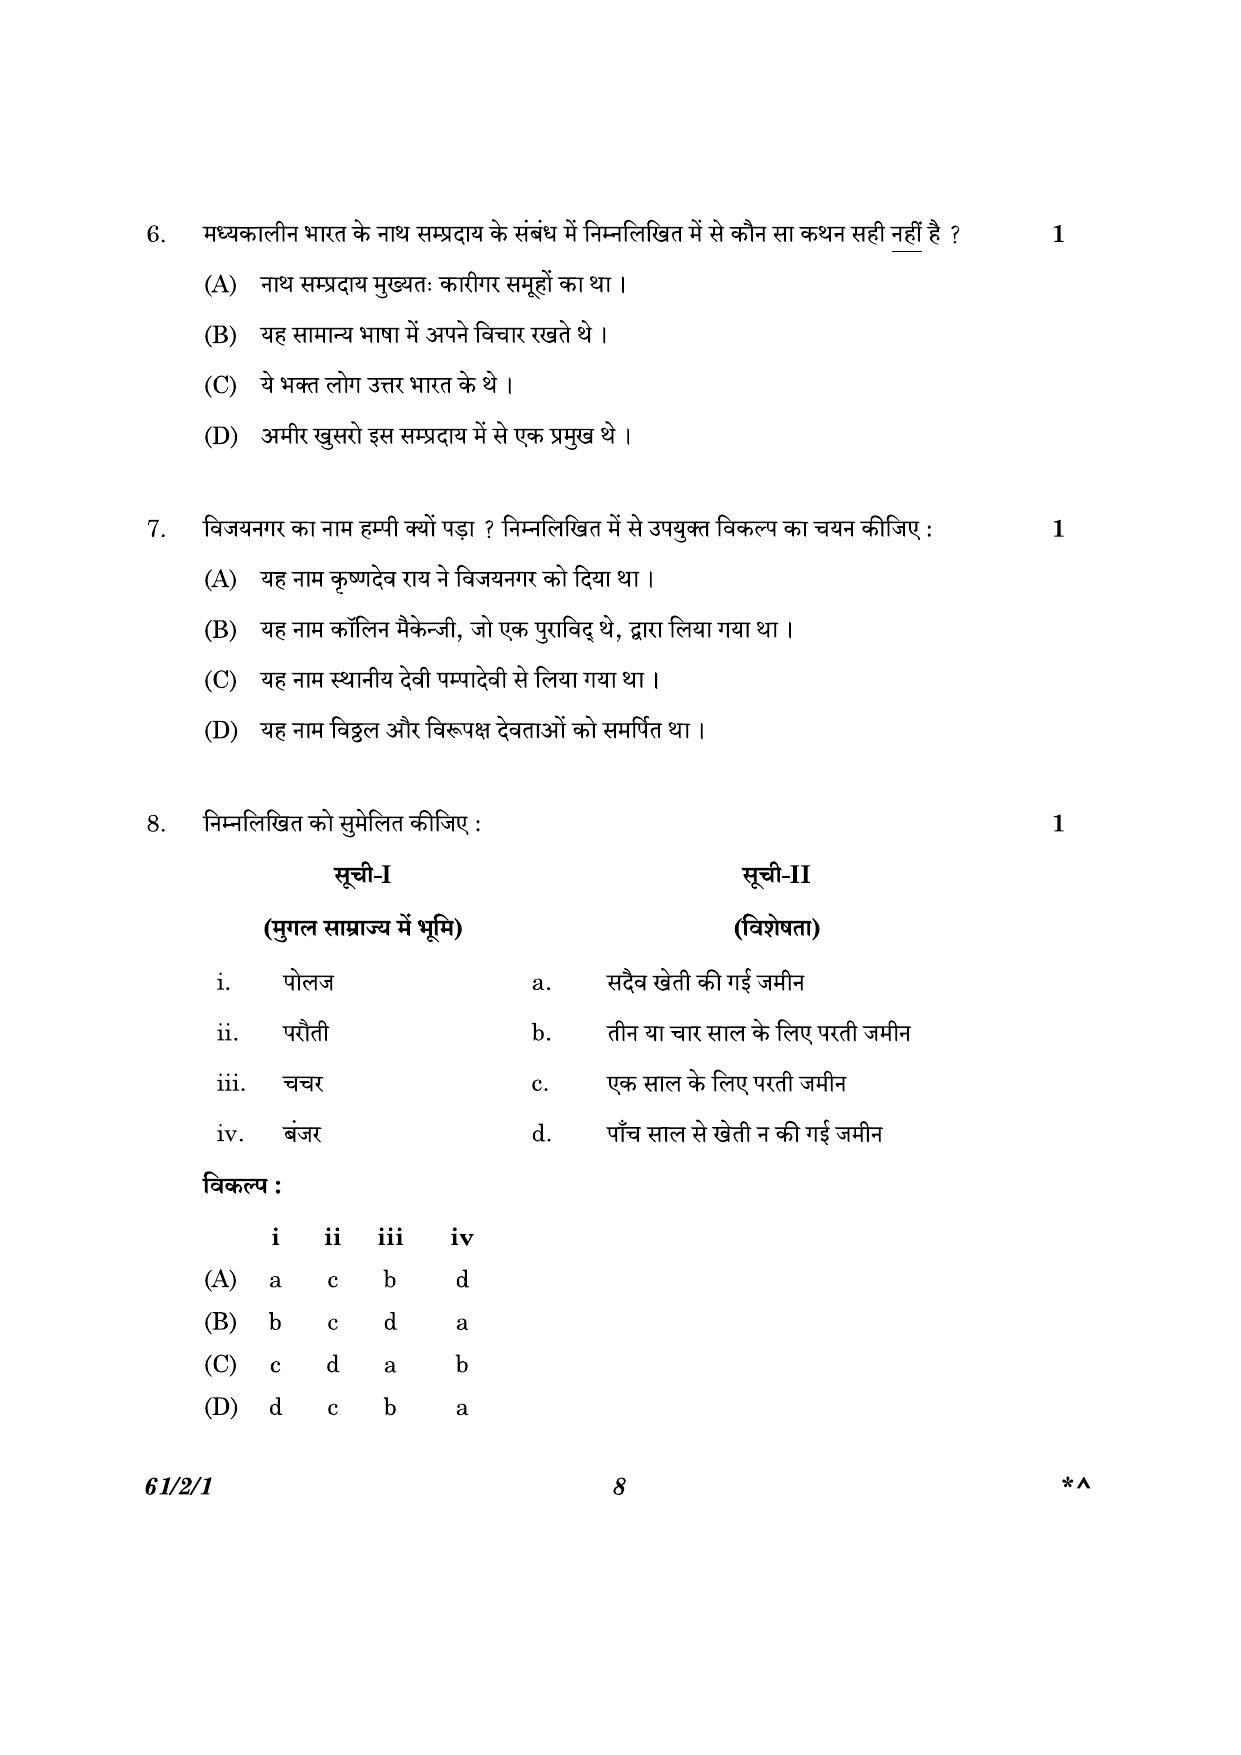 CBSE Class 12 61-2-1 History 2023 Question Paper - Page 8